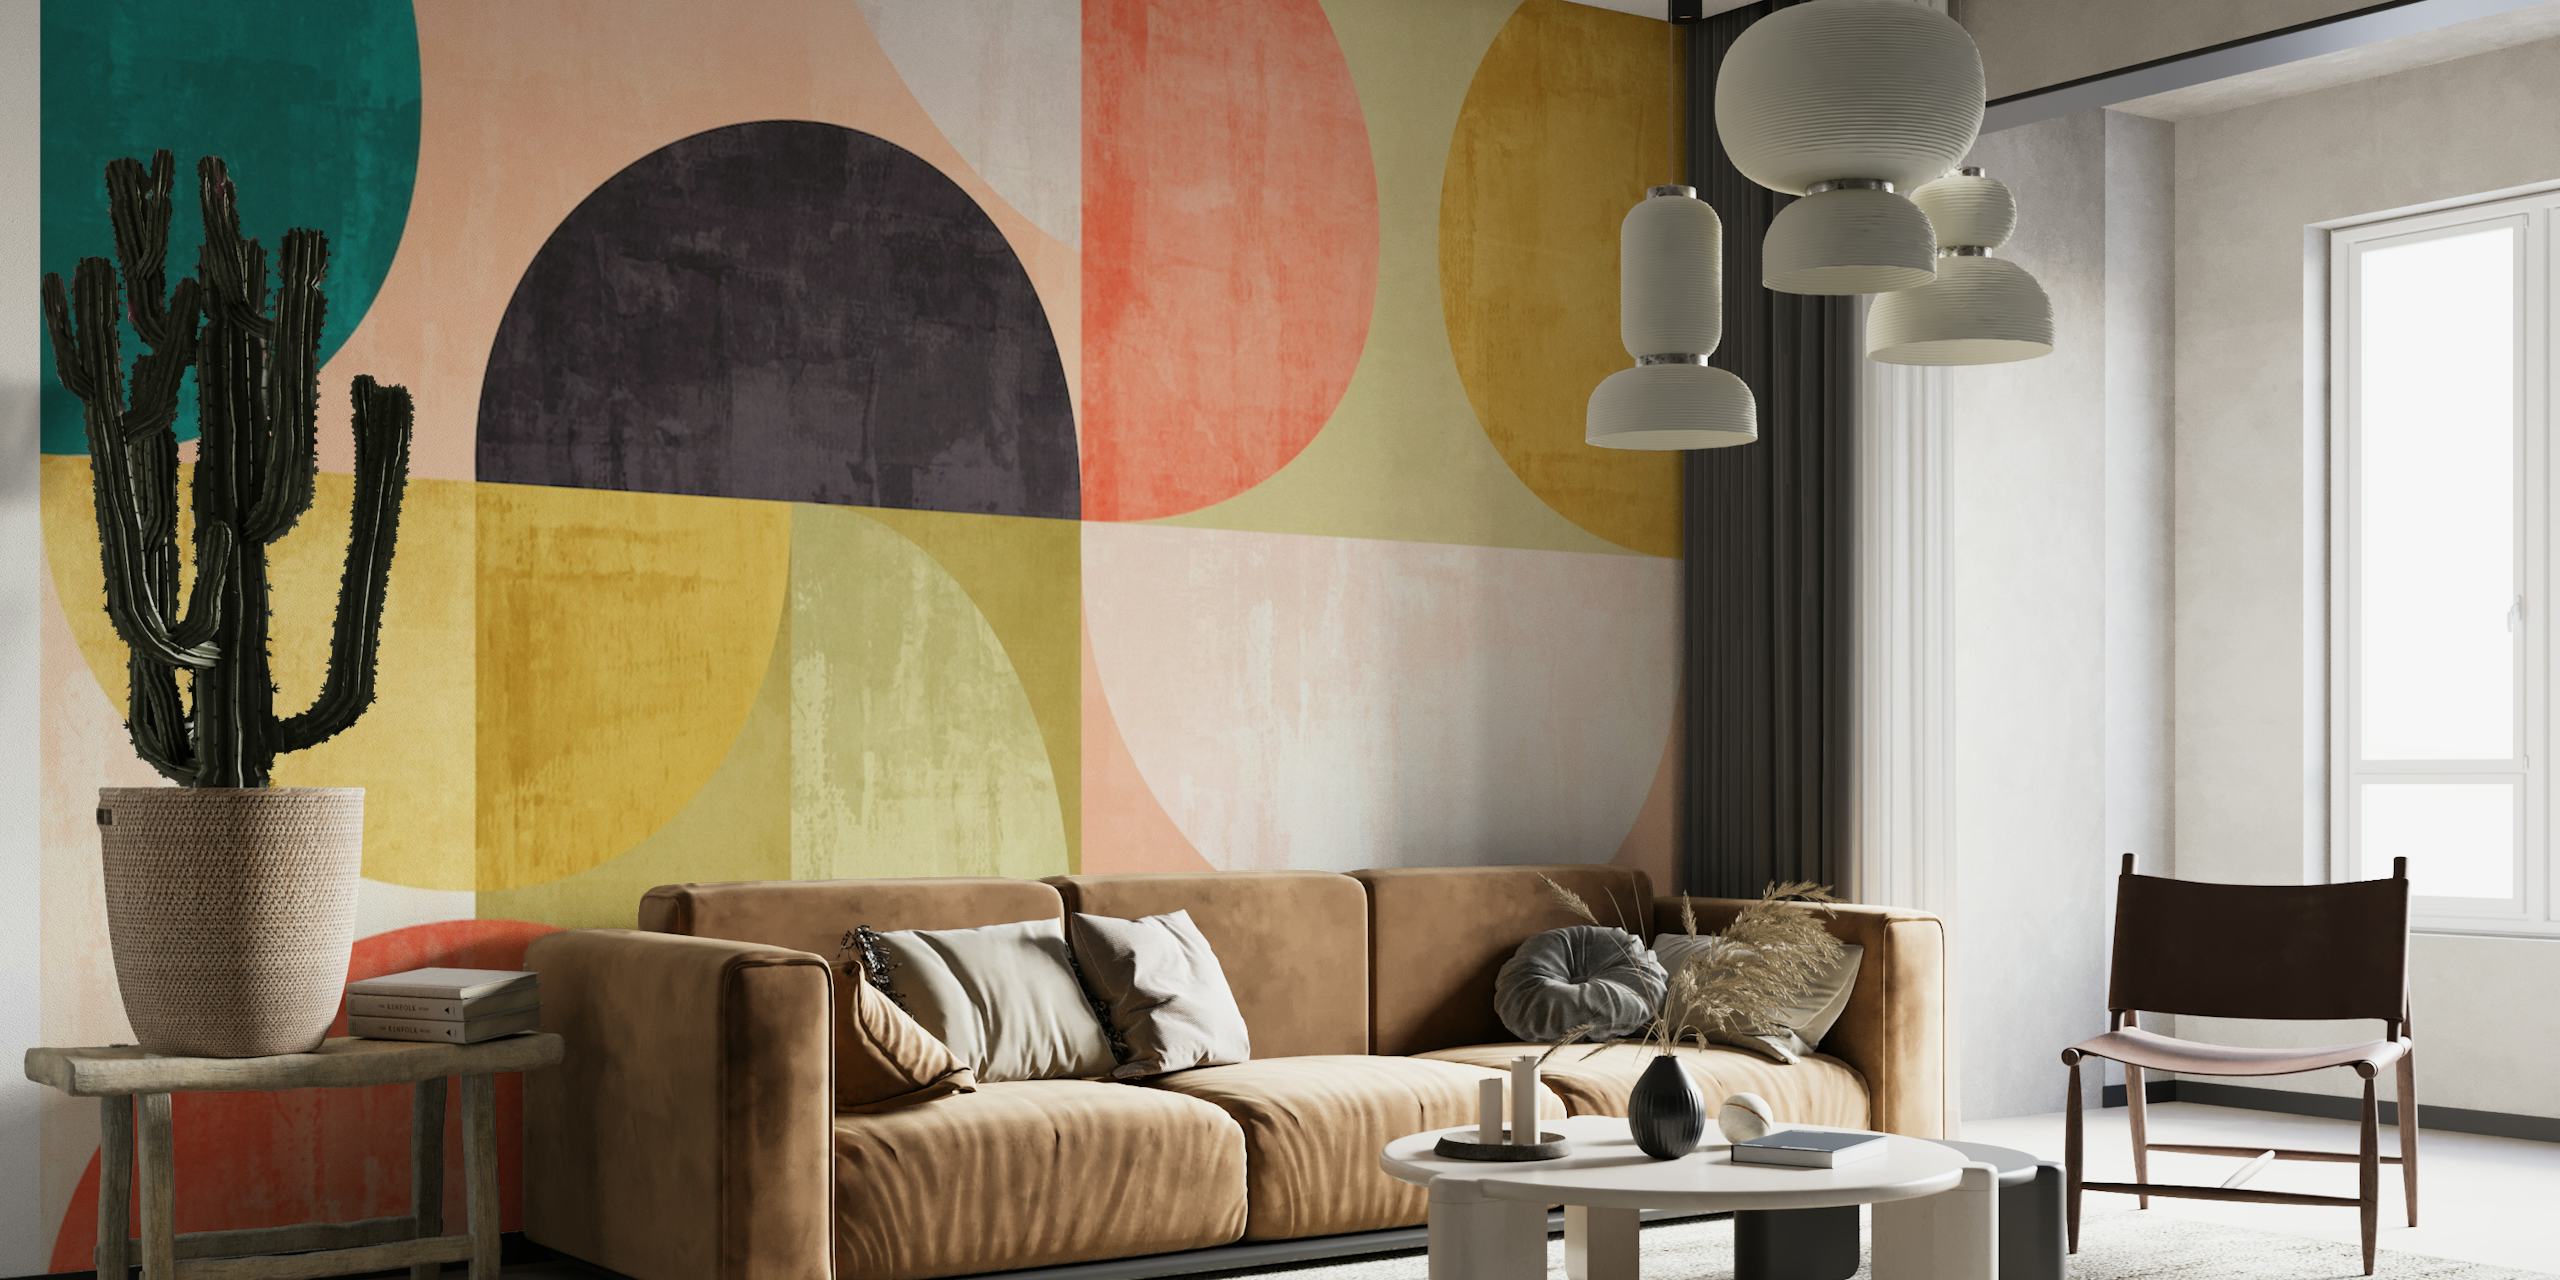 Abstract colorful wall mural with geometric shapes in teal, coral, mustard, and charcoal